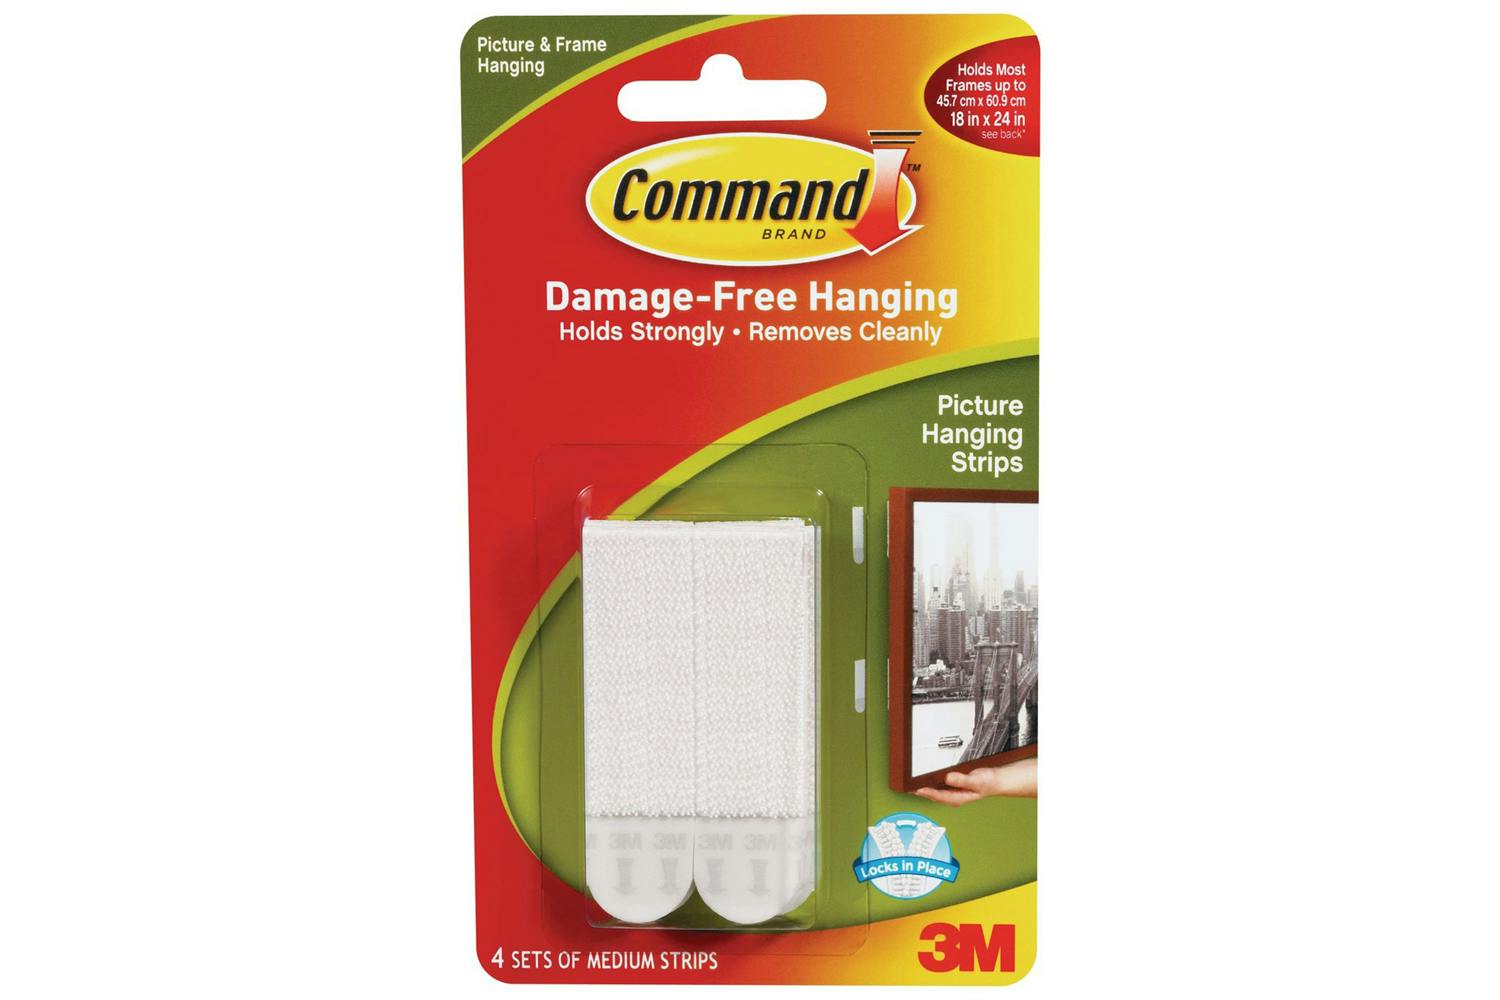 3M Command 4 Sets Medium Picture Hanging Strips | White